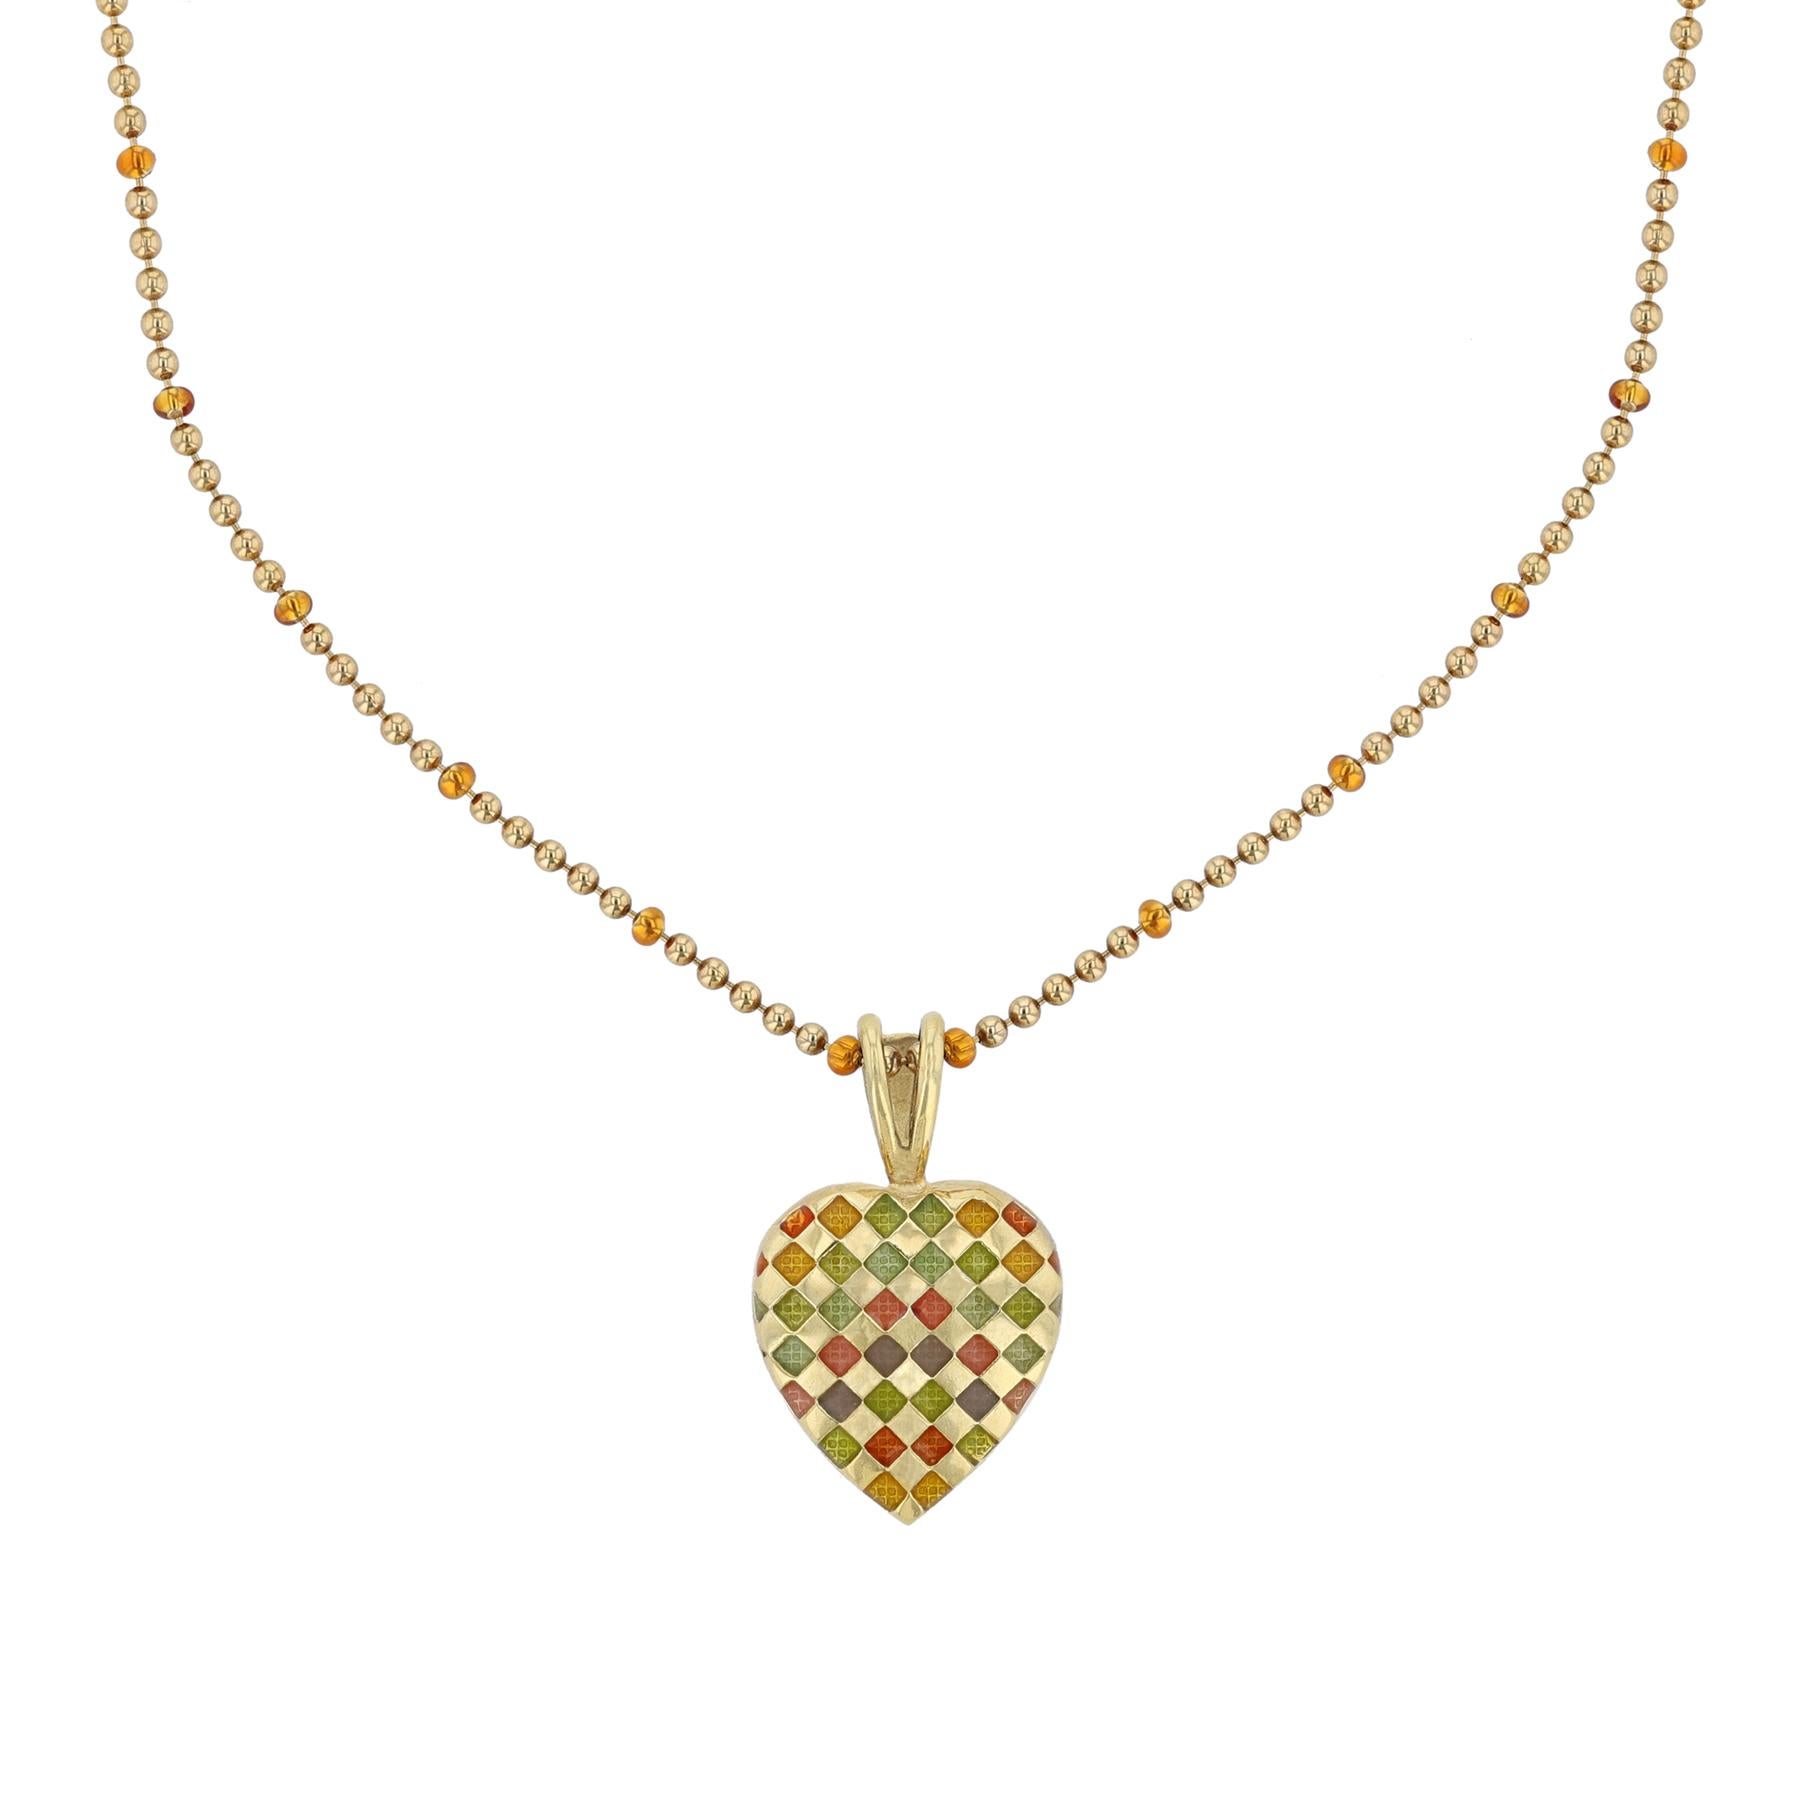 This necklace is made in 18K yellow gold and multi color enamel. It features a heart pendant with a checkerboard pattern.